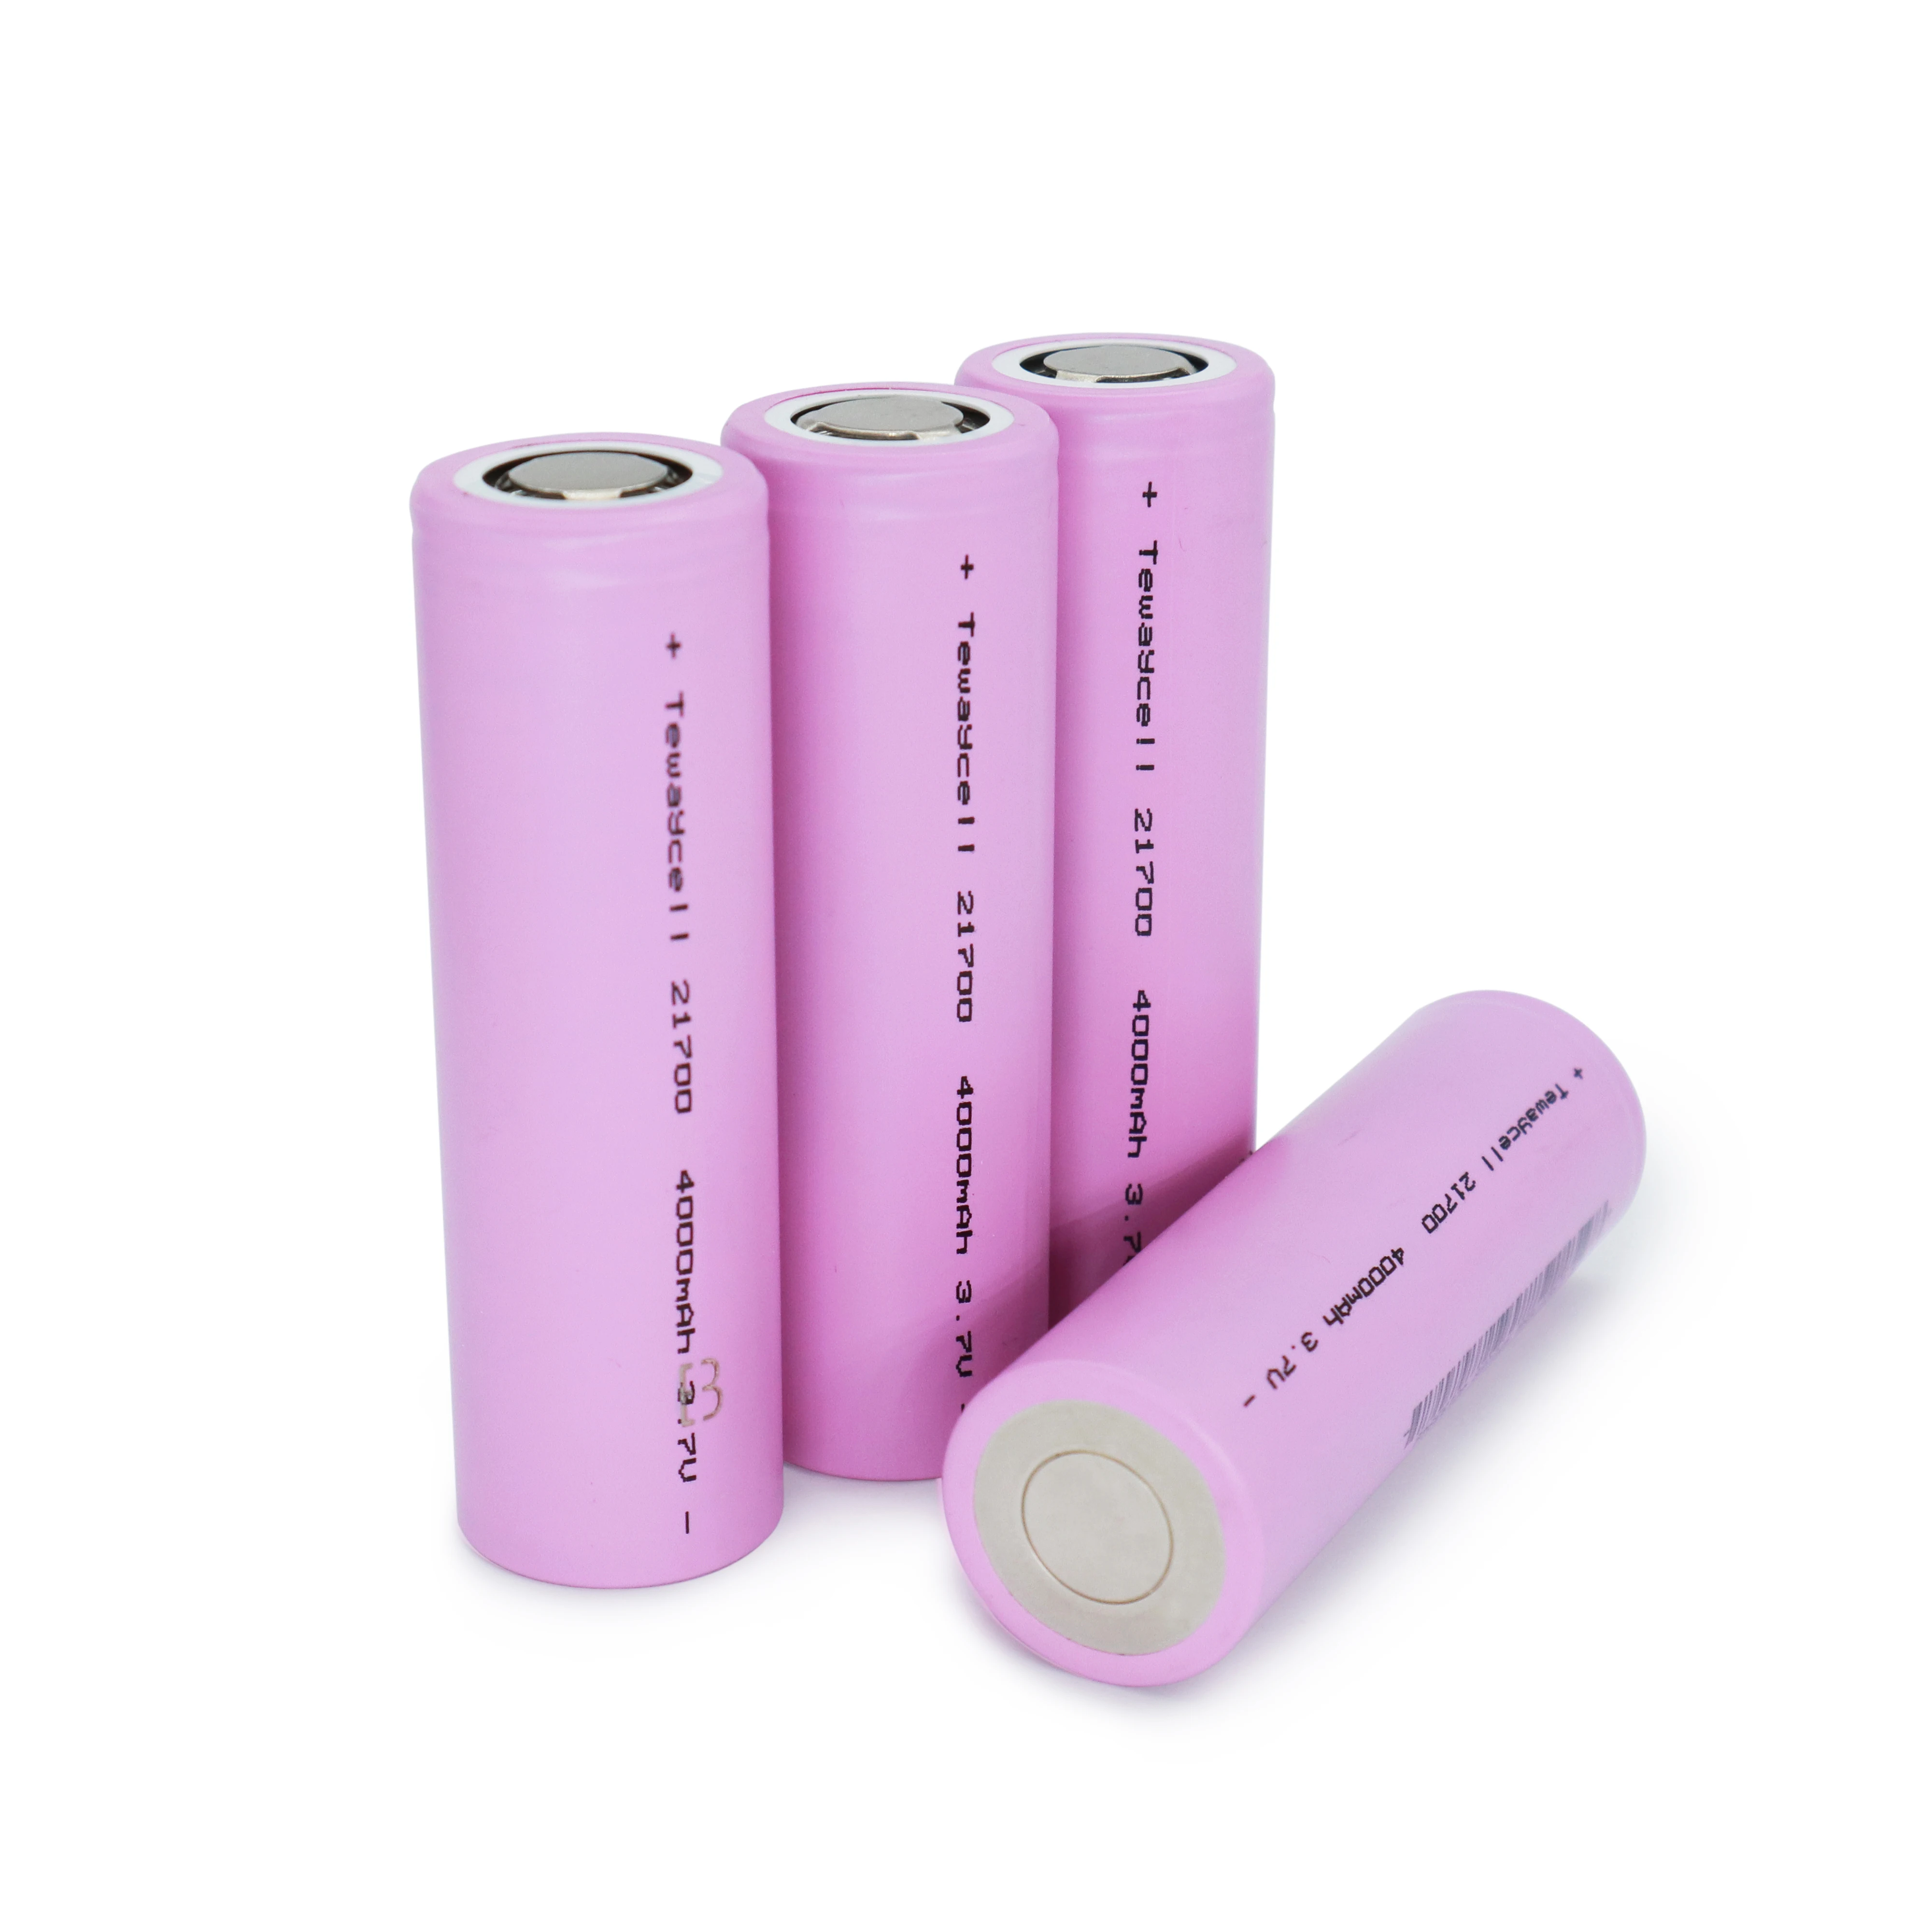 Batterie lithium rechargeable type 21700, 3.7V 4000mAh